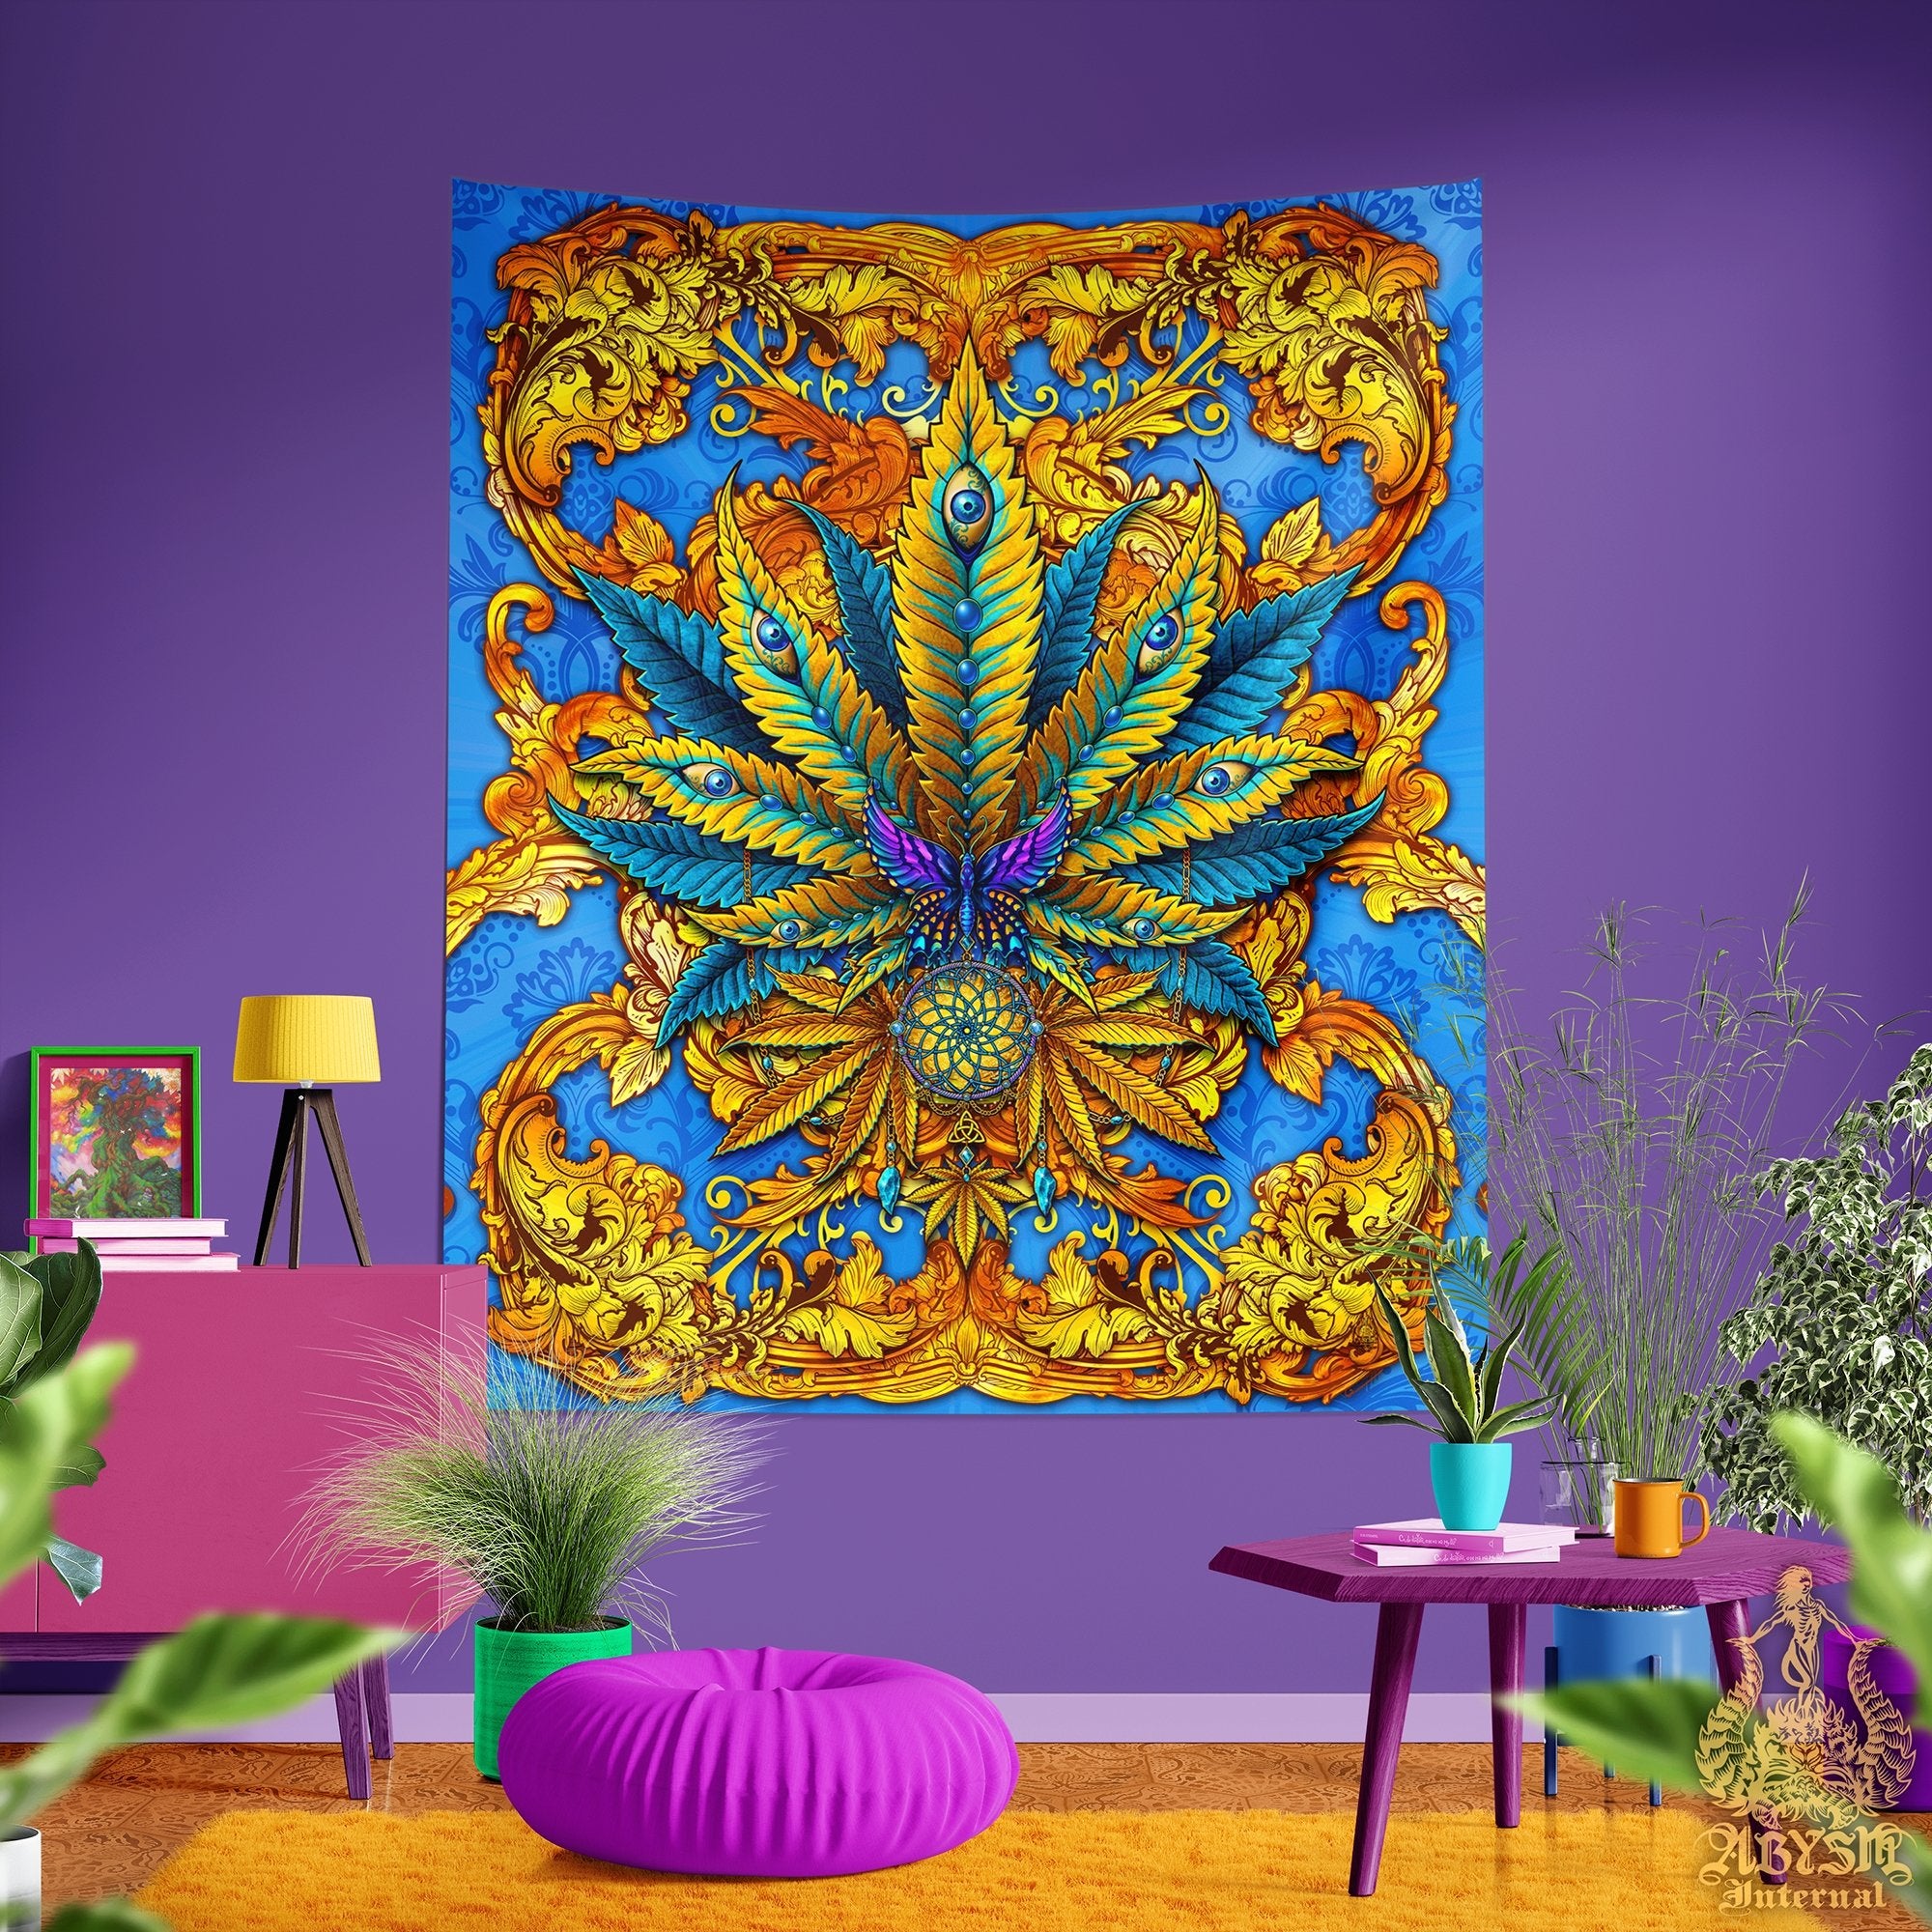 Weed Tapestry, Cannabis Shop Decor, Marijuana Wall Hanging, Hippie Home Decor, Indie Art Print, 420 Gift, Eclectic and Funky - Cyan and Gold - Abysm Internal